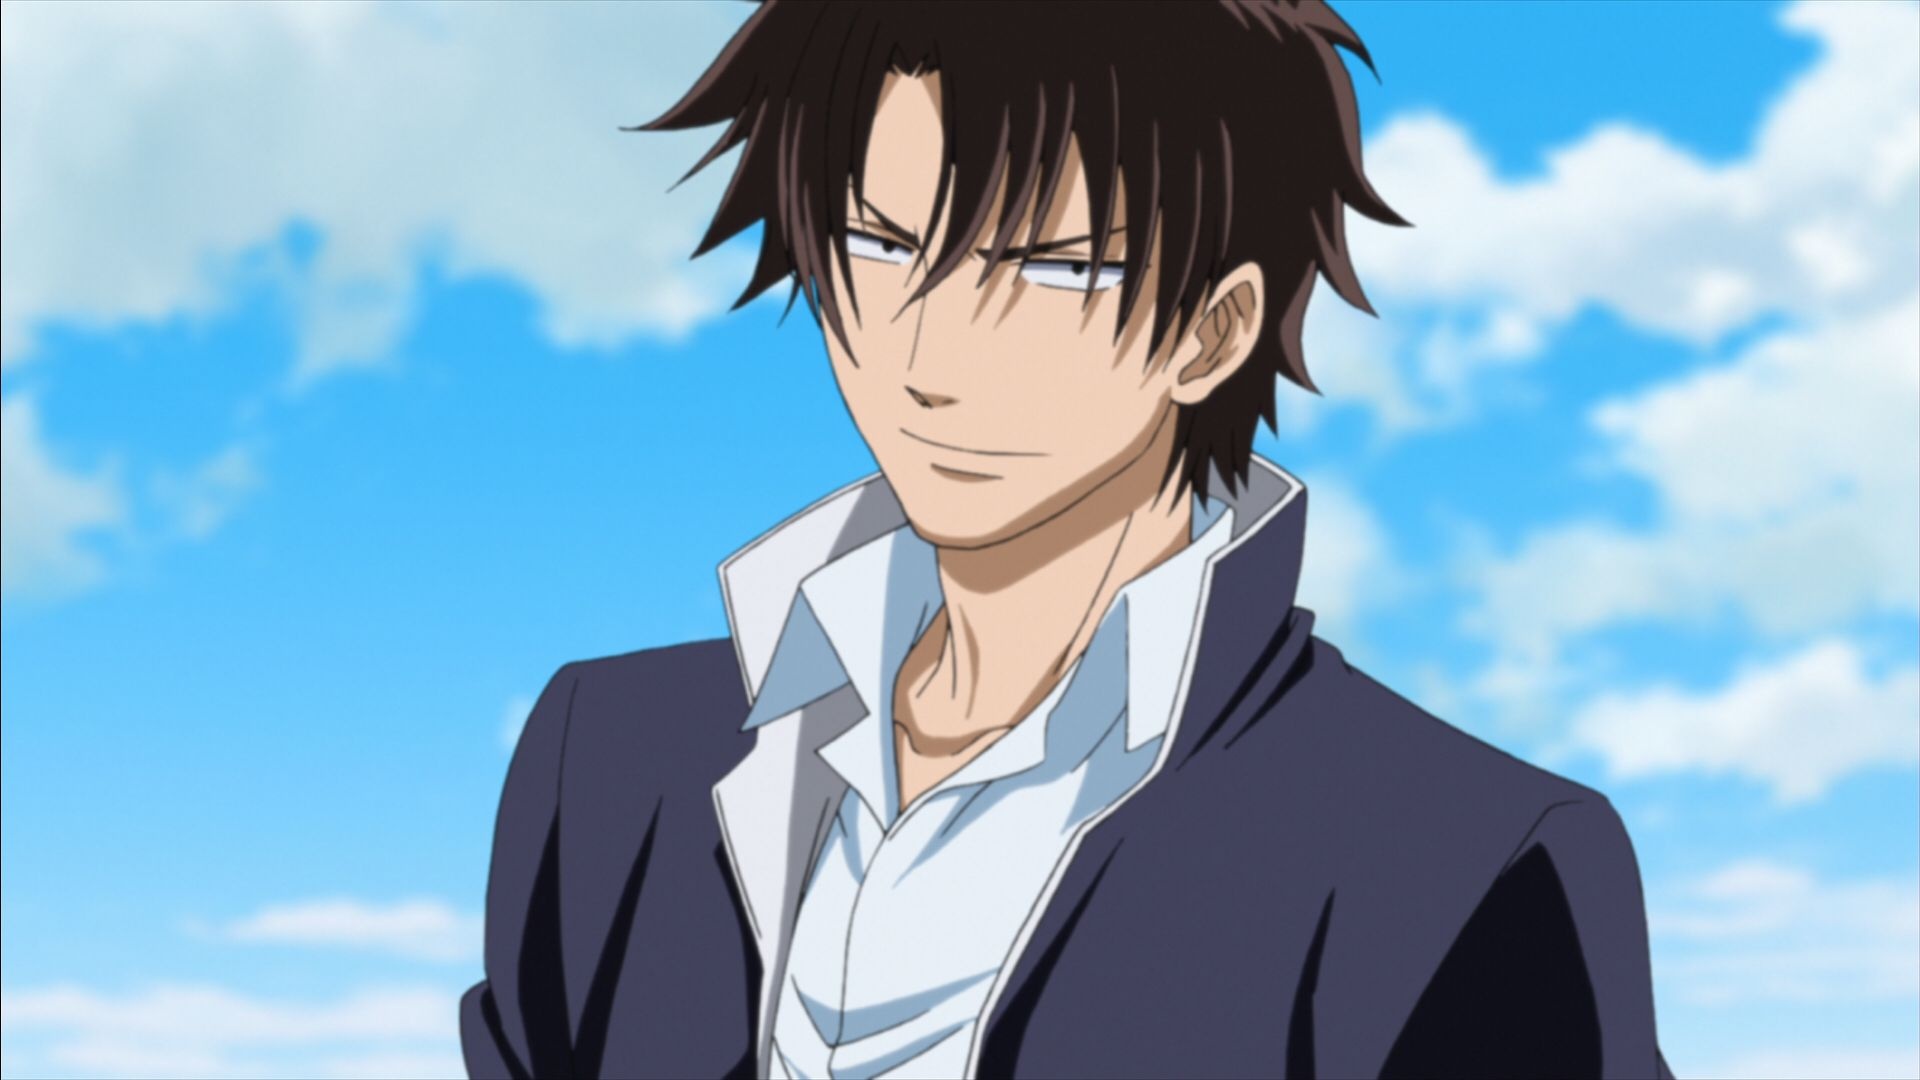 Beelzebub Anime, Oga Tatsumi, Delinquent protagonist, Action-packed, 1920x1080 Full HD Desktop